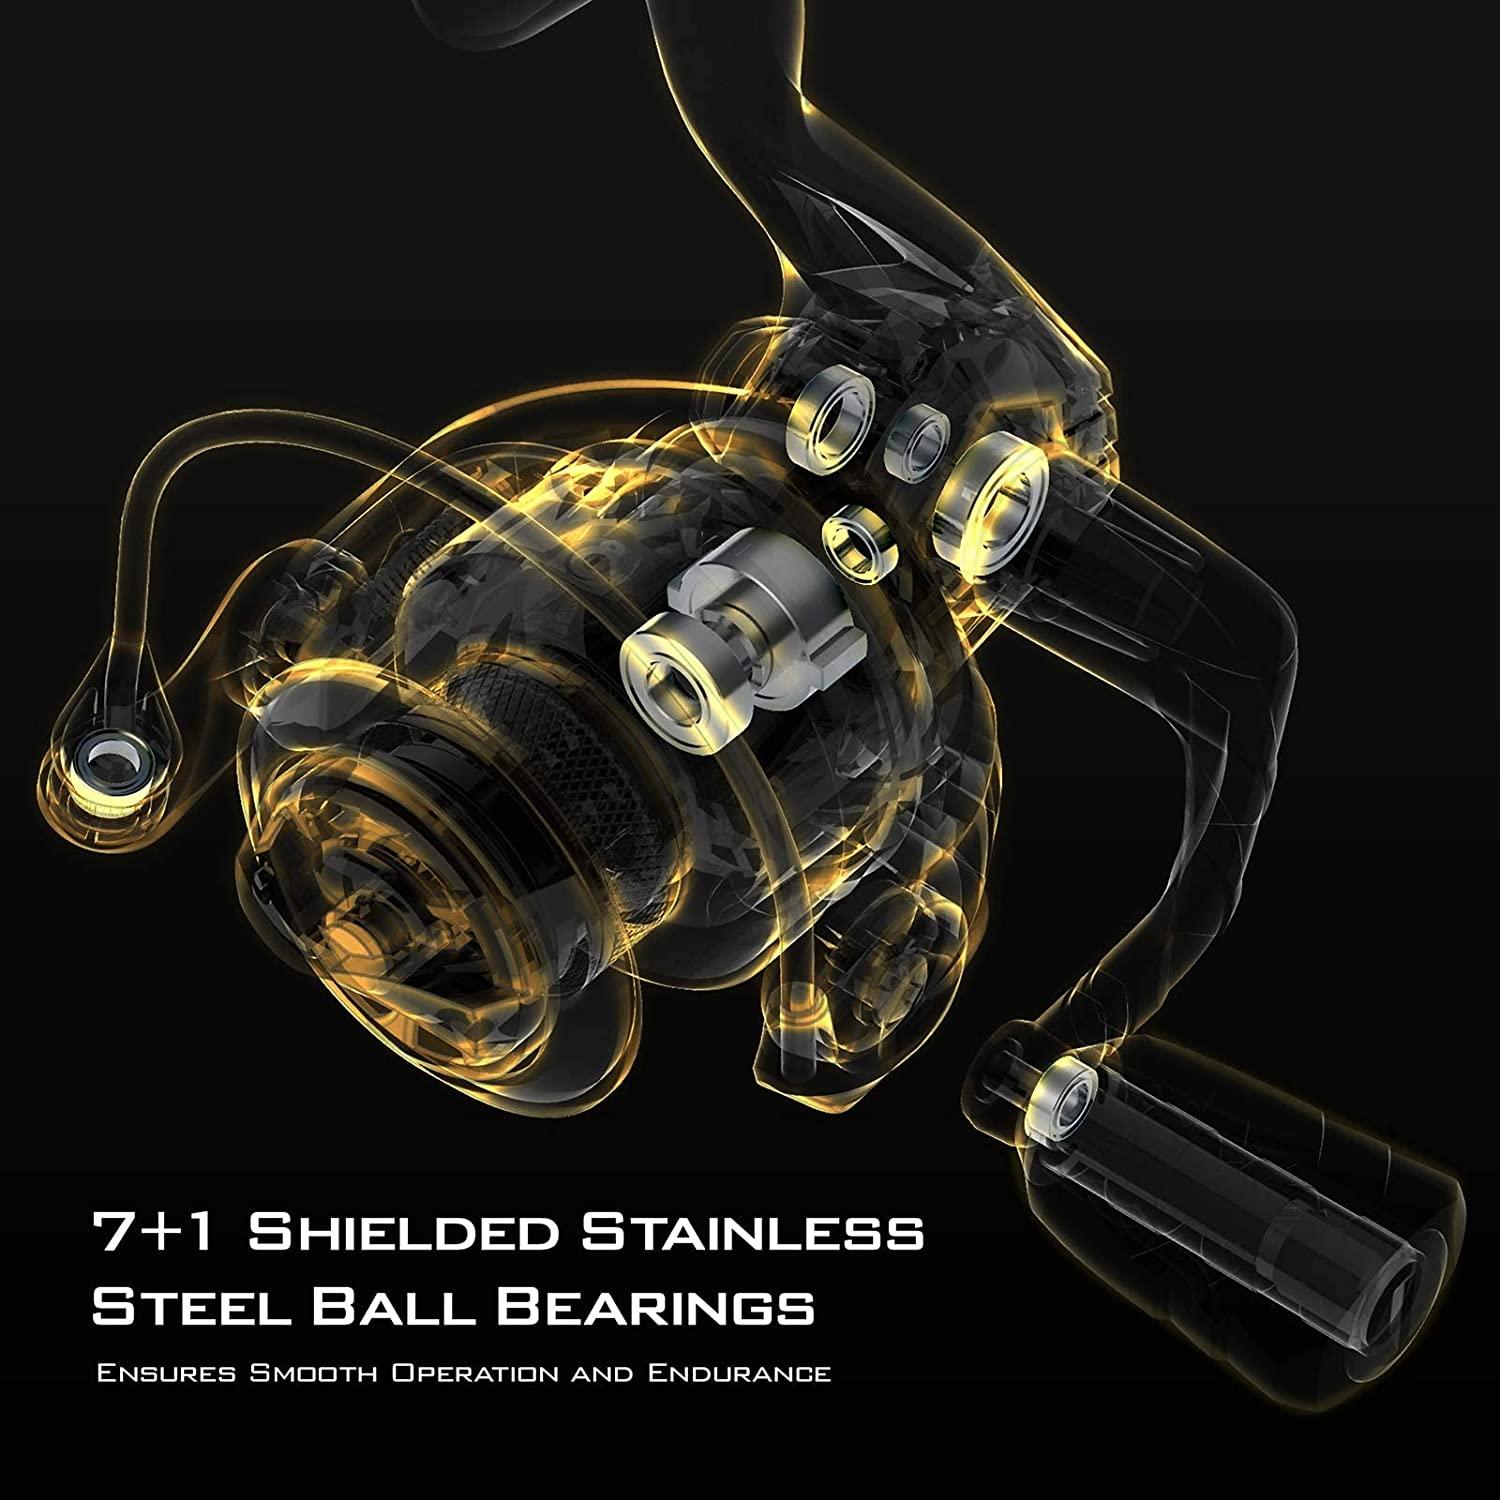 KastKing Valiant Eagle Gold Spinning Reel - 6.2:1 High-Speed Gear Ratio,  Freshwater and Saltwater Fishing Reel, Faster Line Retrieve, Braid Ready  Spool, 7+1 Shielded Stainless Steel Ball Bearings 3000-6.2:1